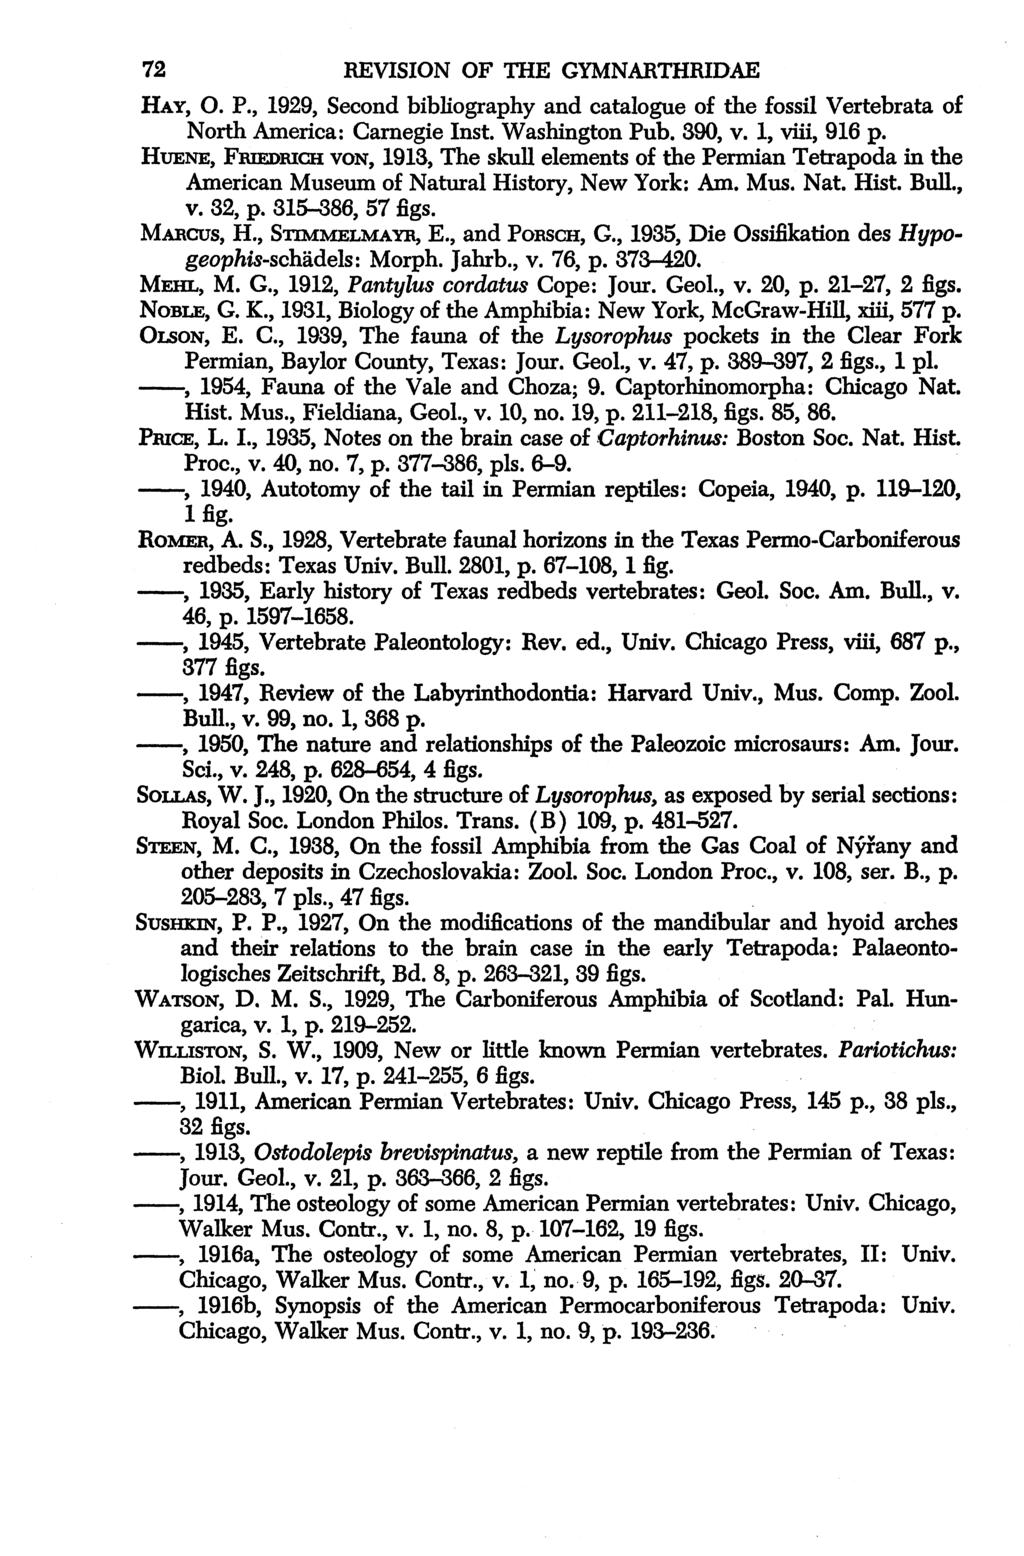 72 REVISION OF THE GYMNARTHRIDAE HAY, O. P., 1929, Second bibliography and catalogue of the fossil Vertebrata of North America: Carnegie Inst. Washington Pub. 390, v. 1, viii, 916 p.